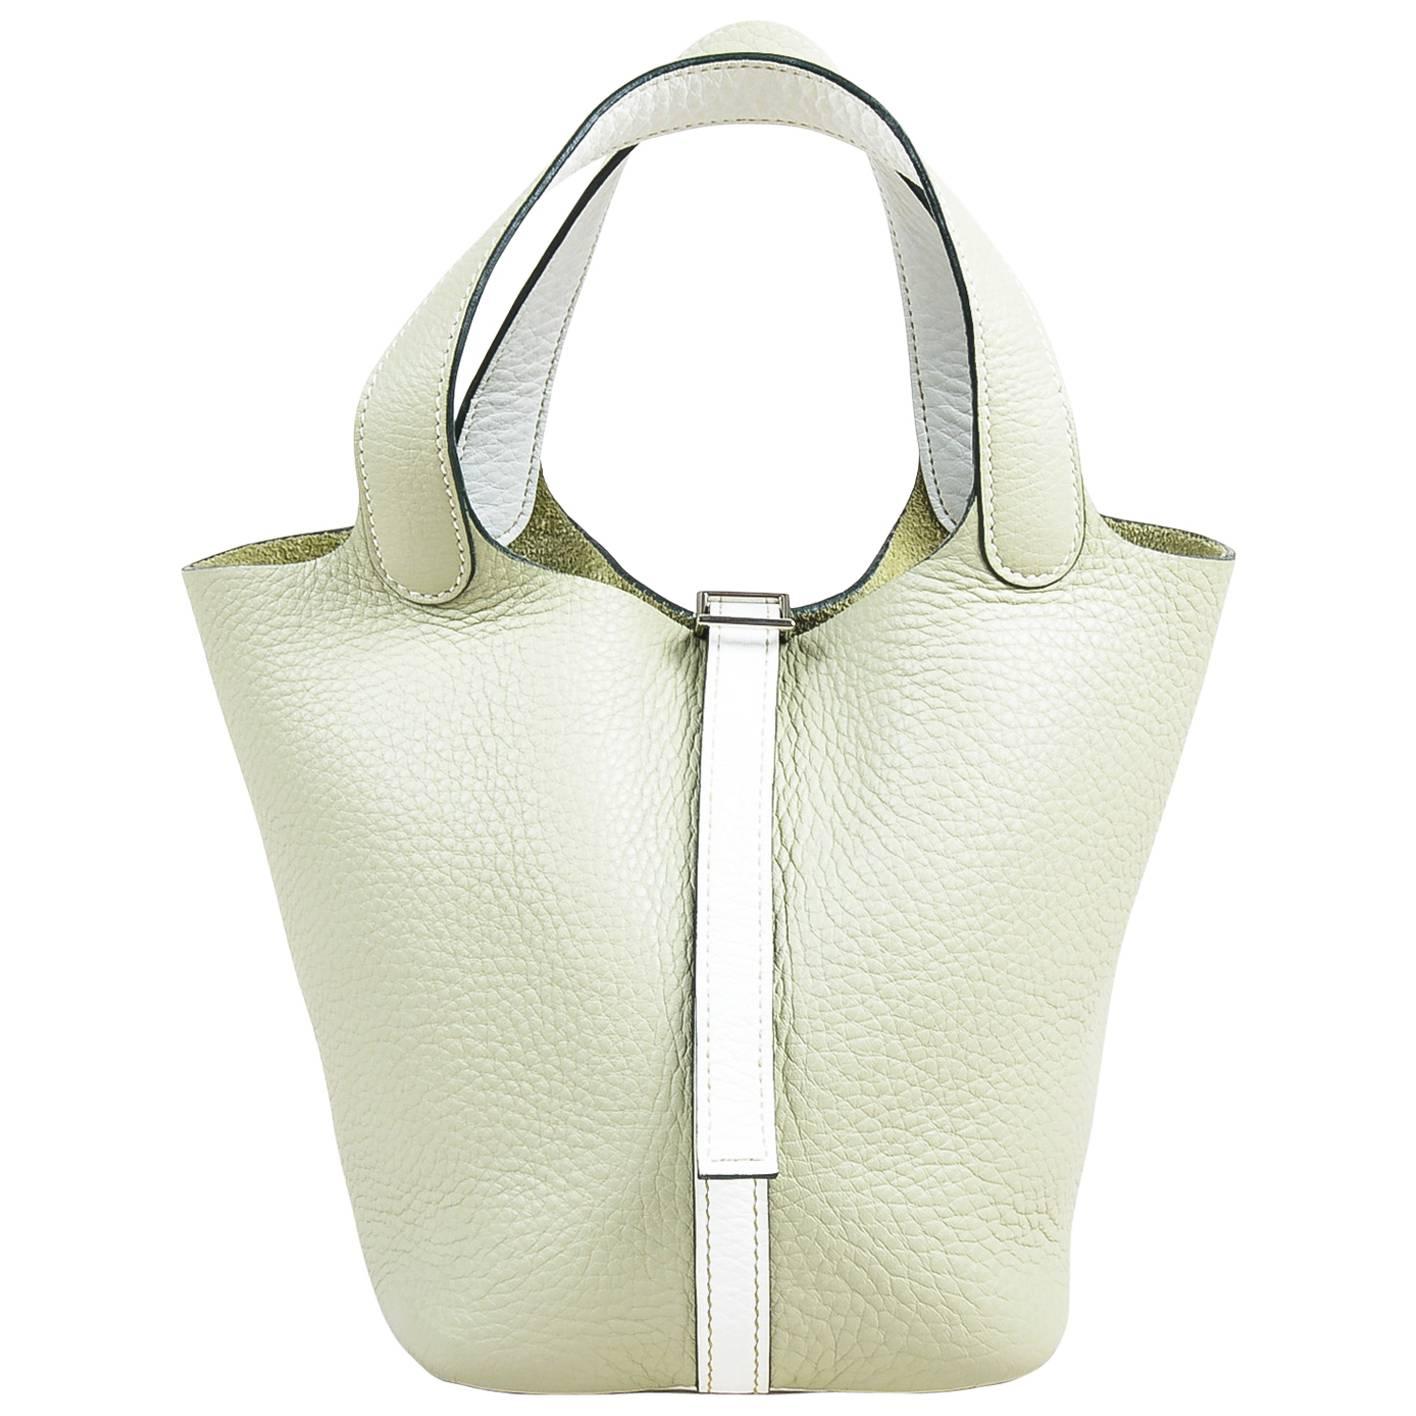 Hermes Pistache Blanc Clemence Leather "Picotin Lock PM" Tote Bag For Sale